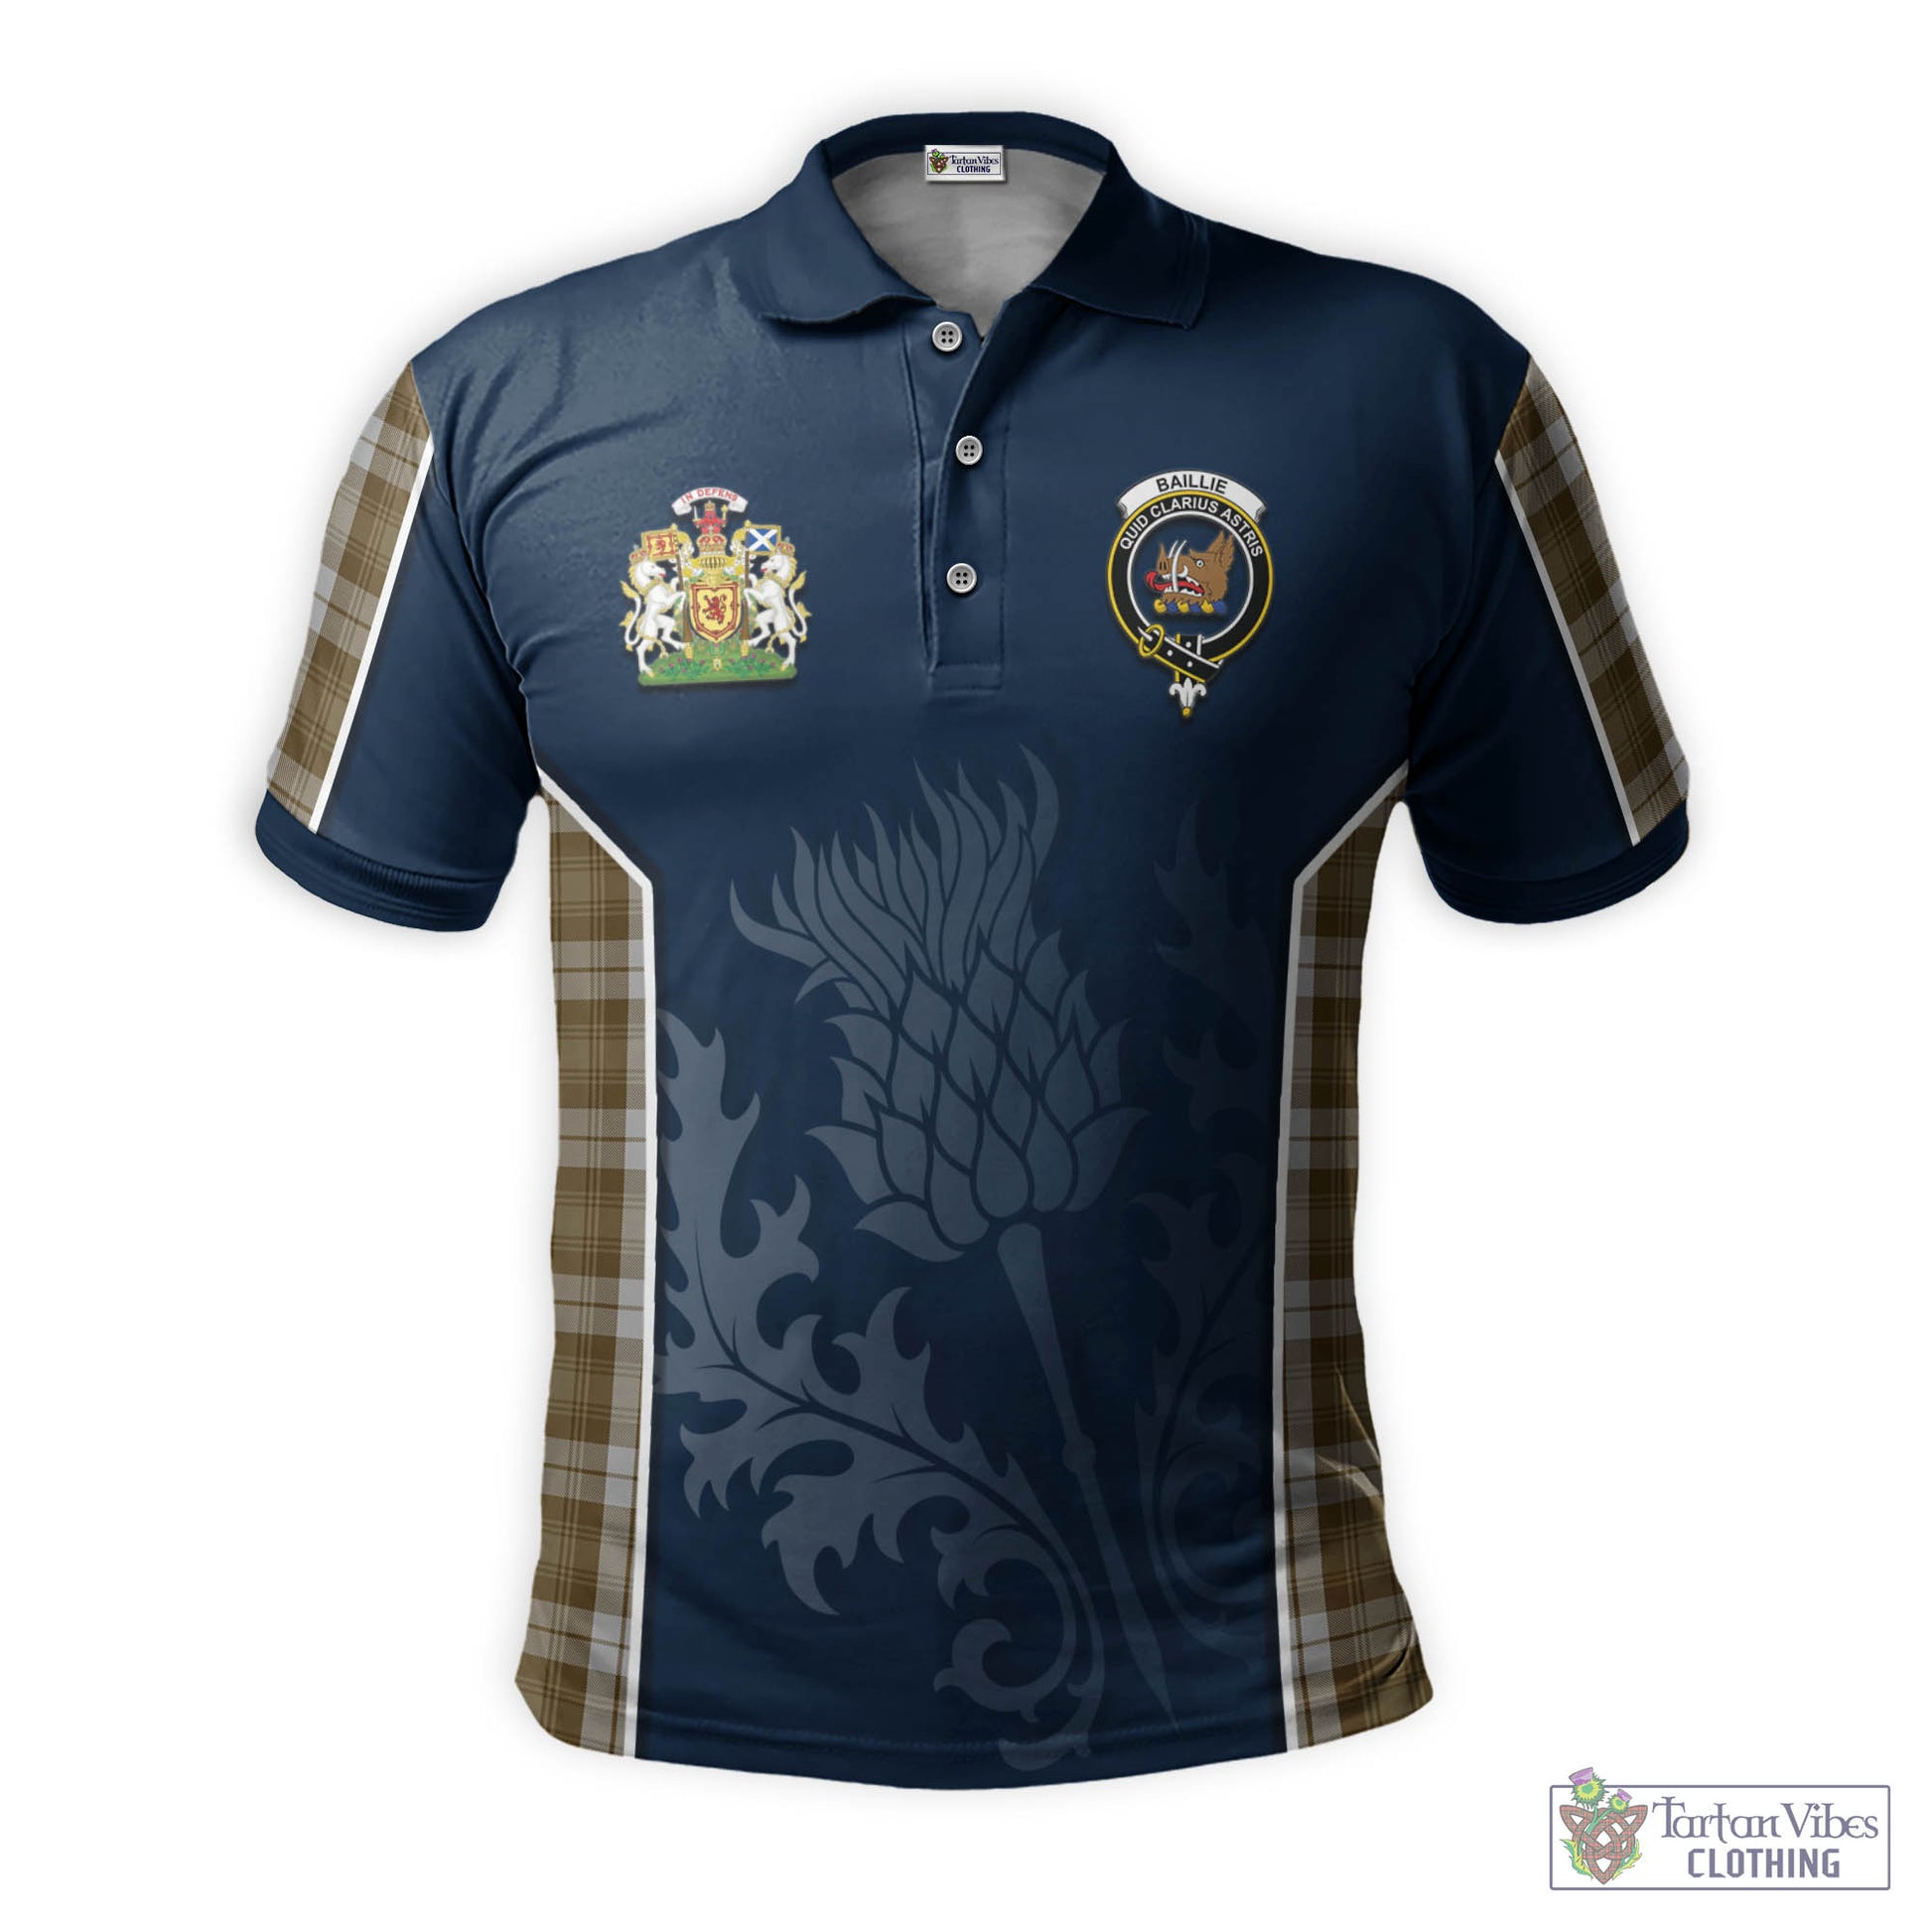 Tartan Vibes Clothing Baillie Dress Tartan Men's Polo Shirt with Family Crest and Scottish Thistle Vibes Sport Style